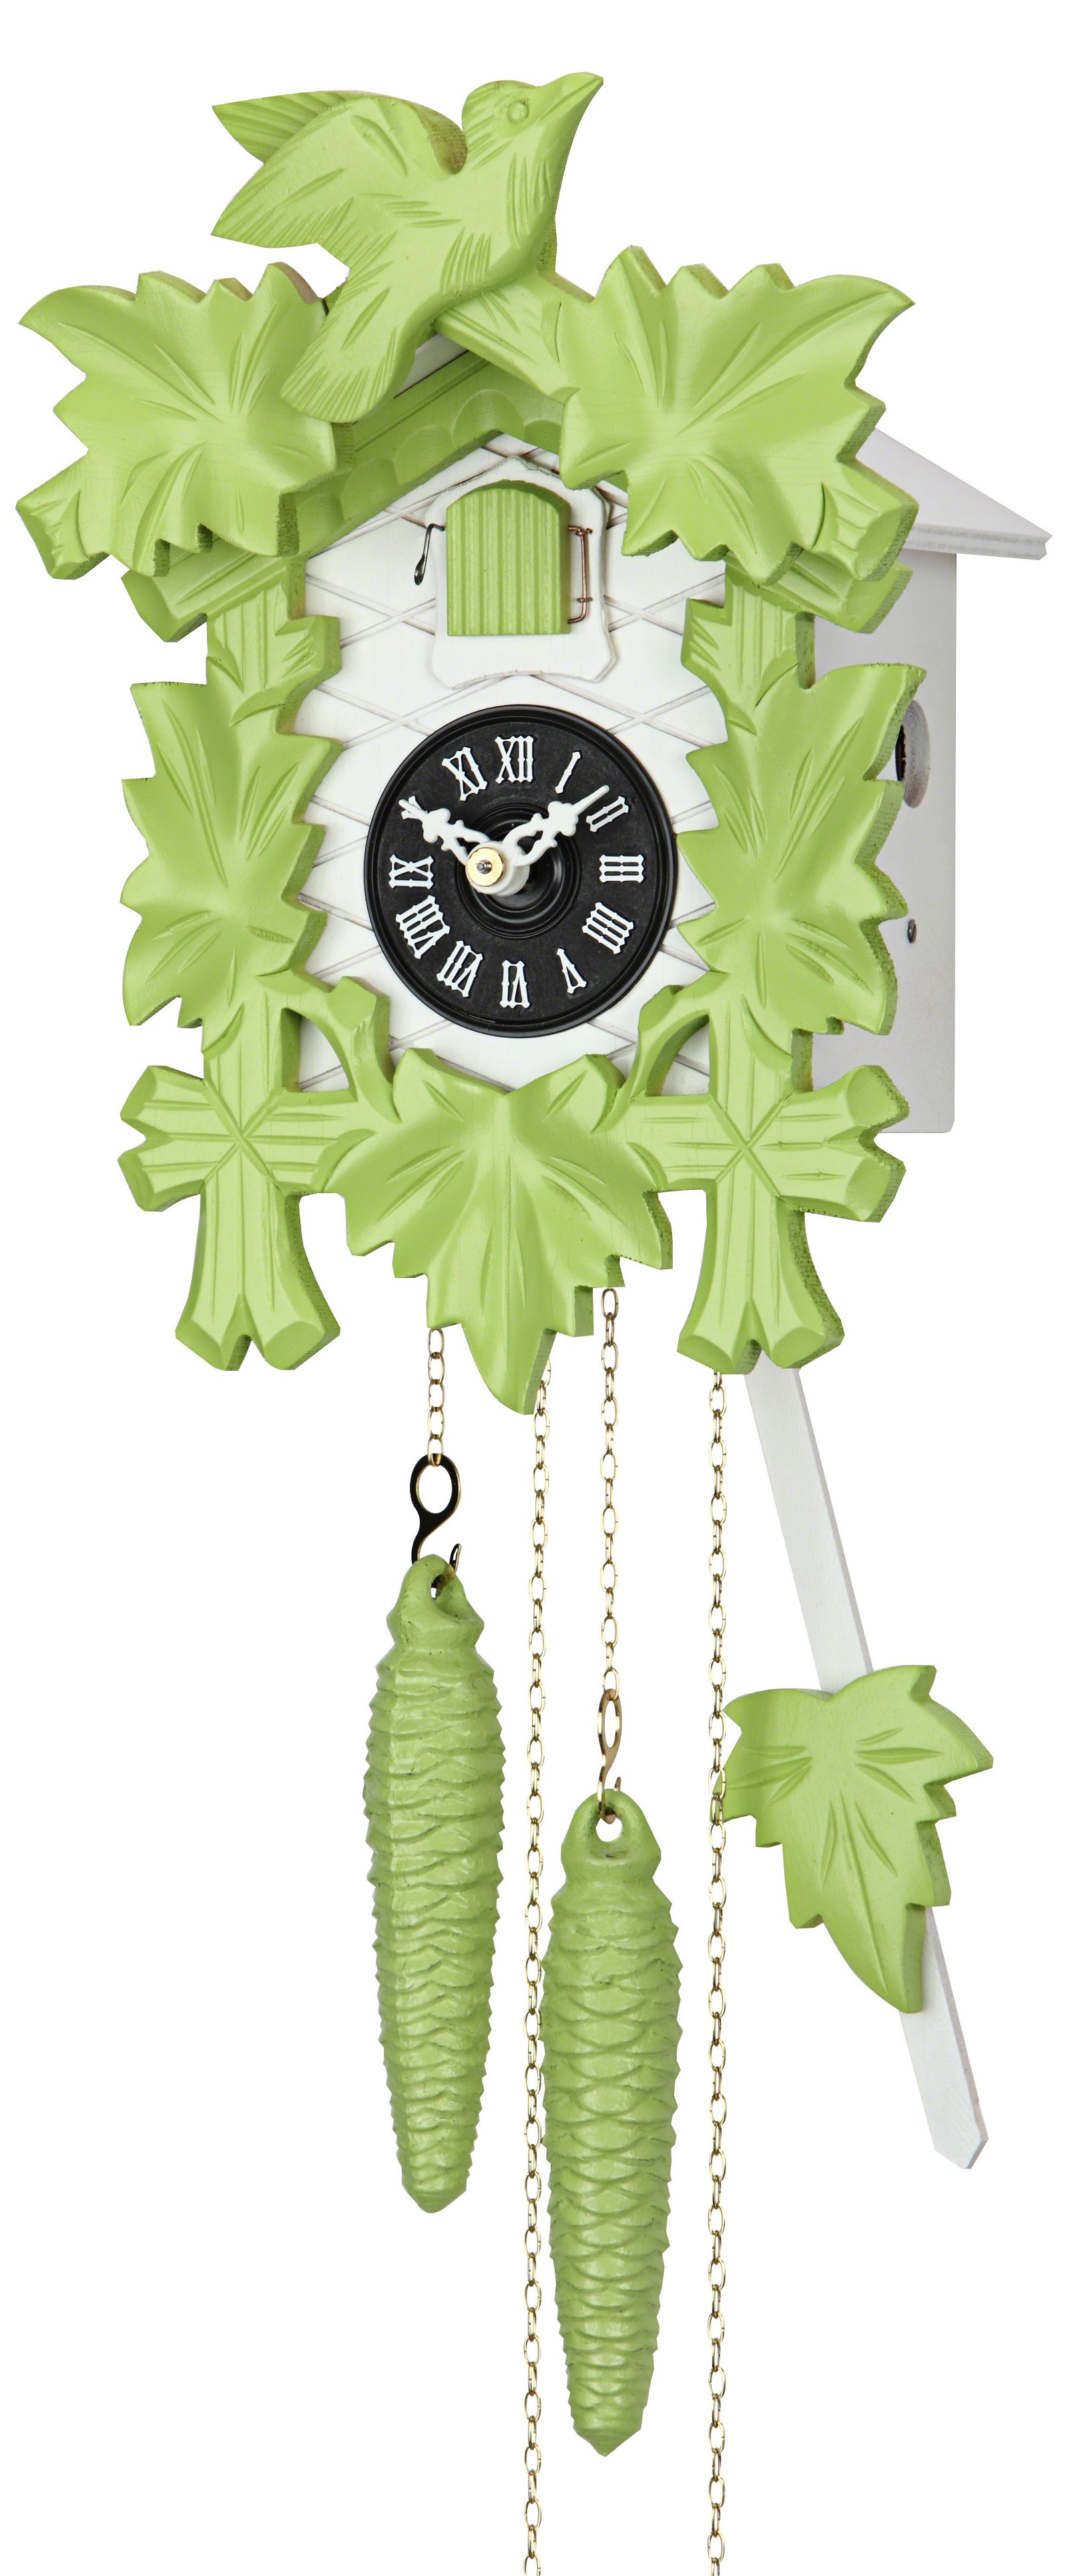 Cuckoo Clock Carved Style 1 Day Movement 21cm by Hekas